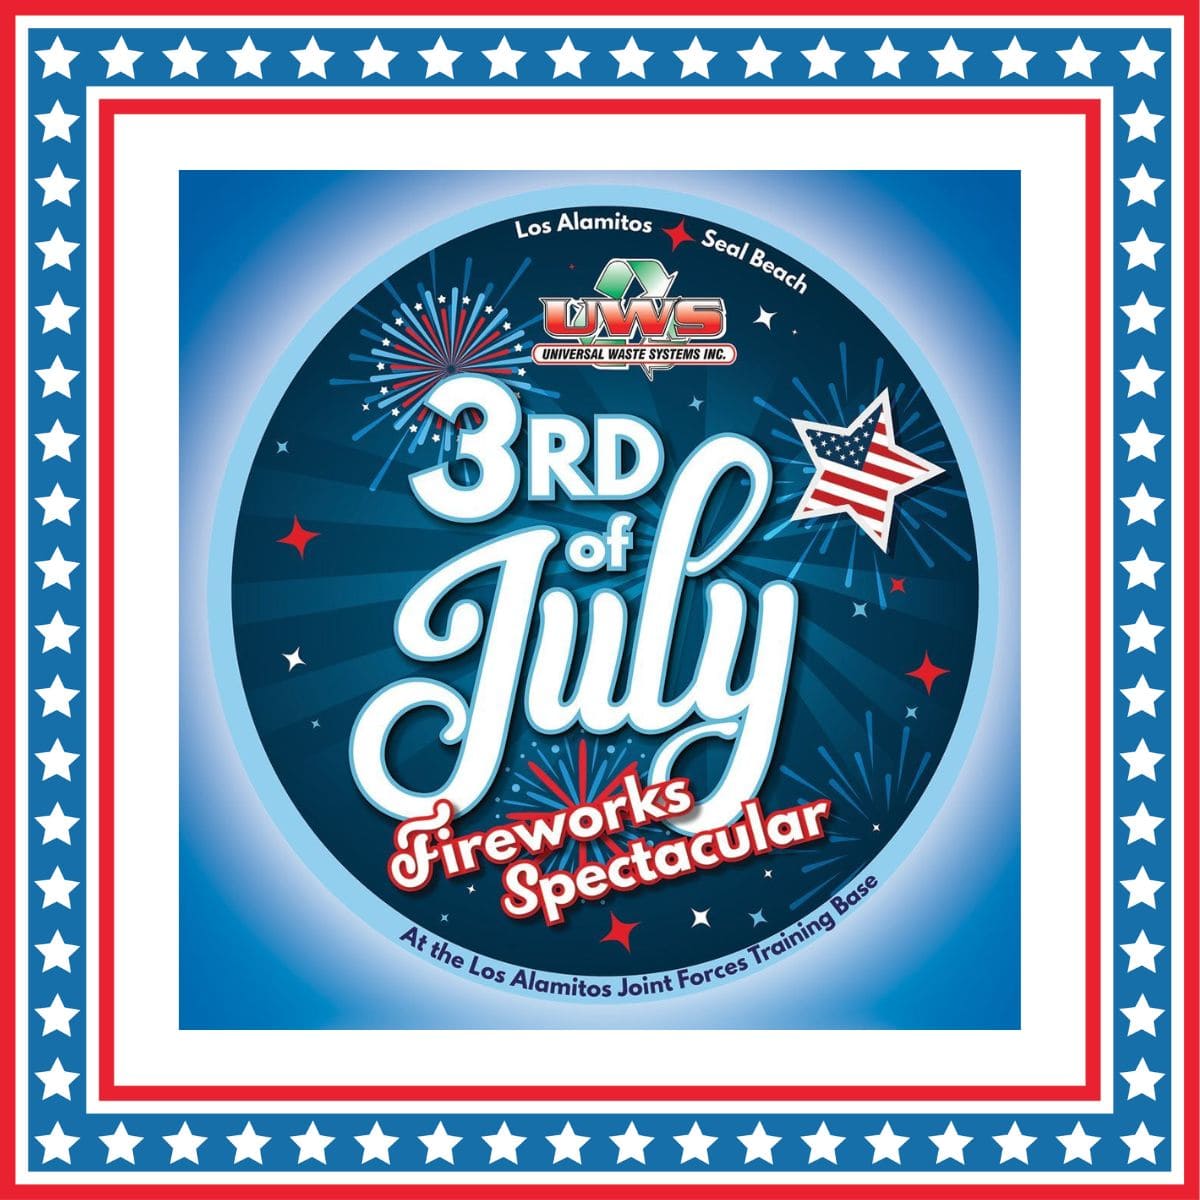 Los Alamitos 3rd Of July Fireworks Spectacular